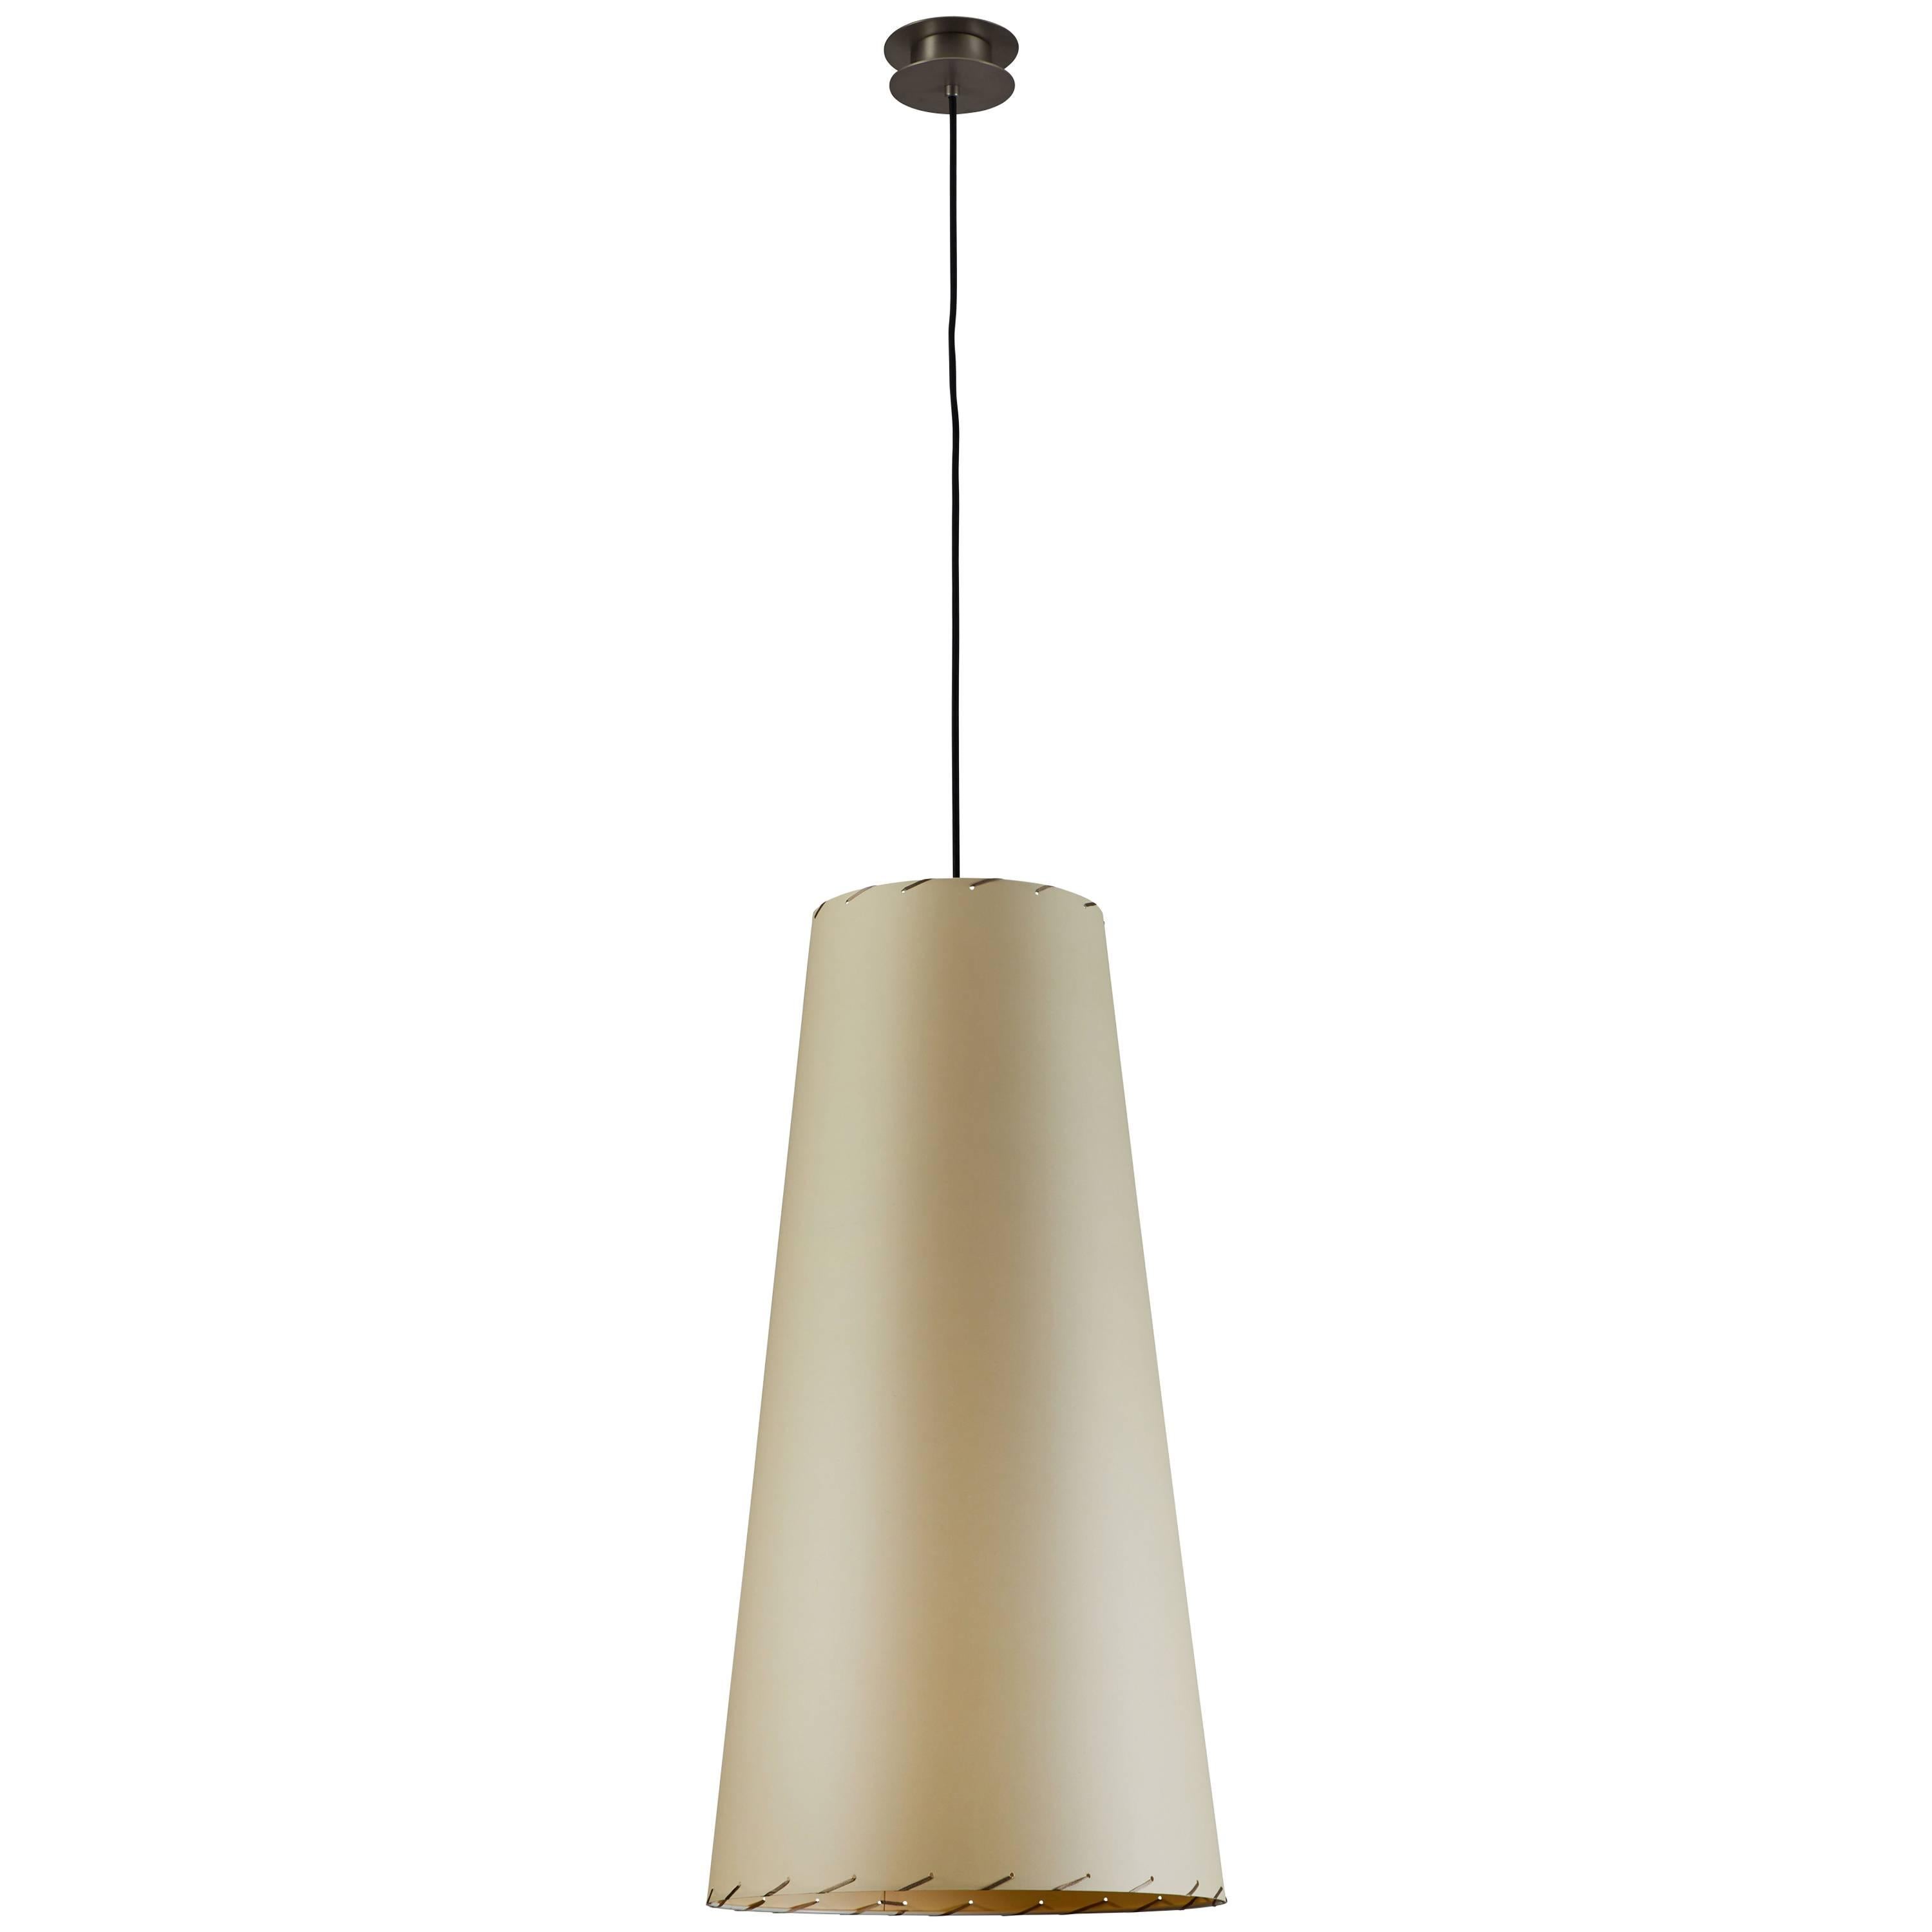 GT4 Pendant Lamp by Gabriel Ordeig Cole for Santa and Cole